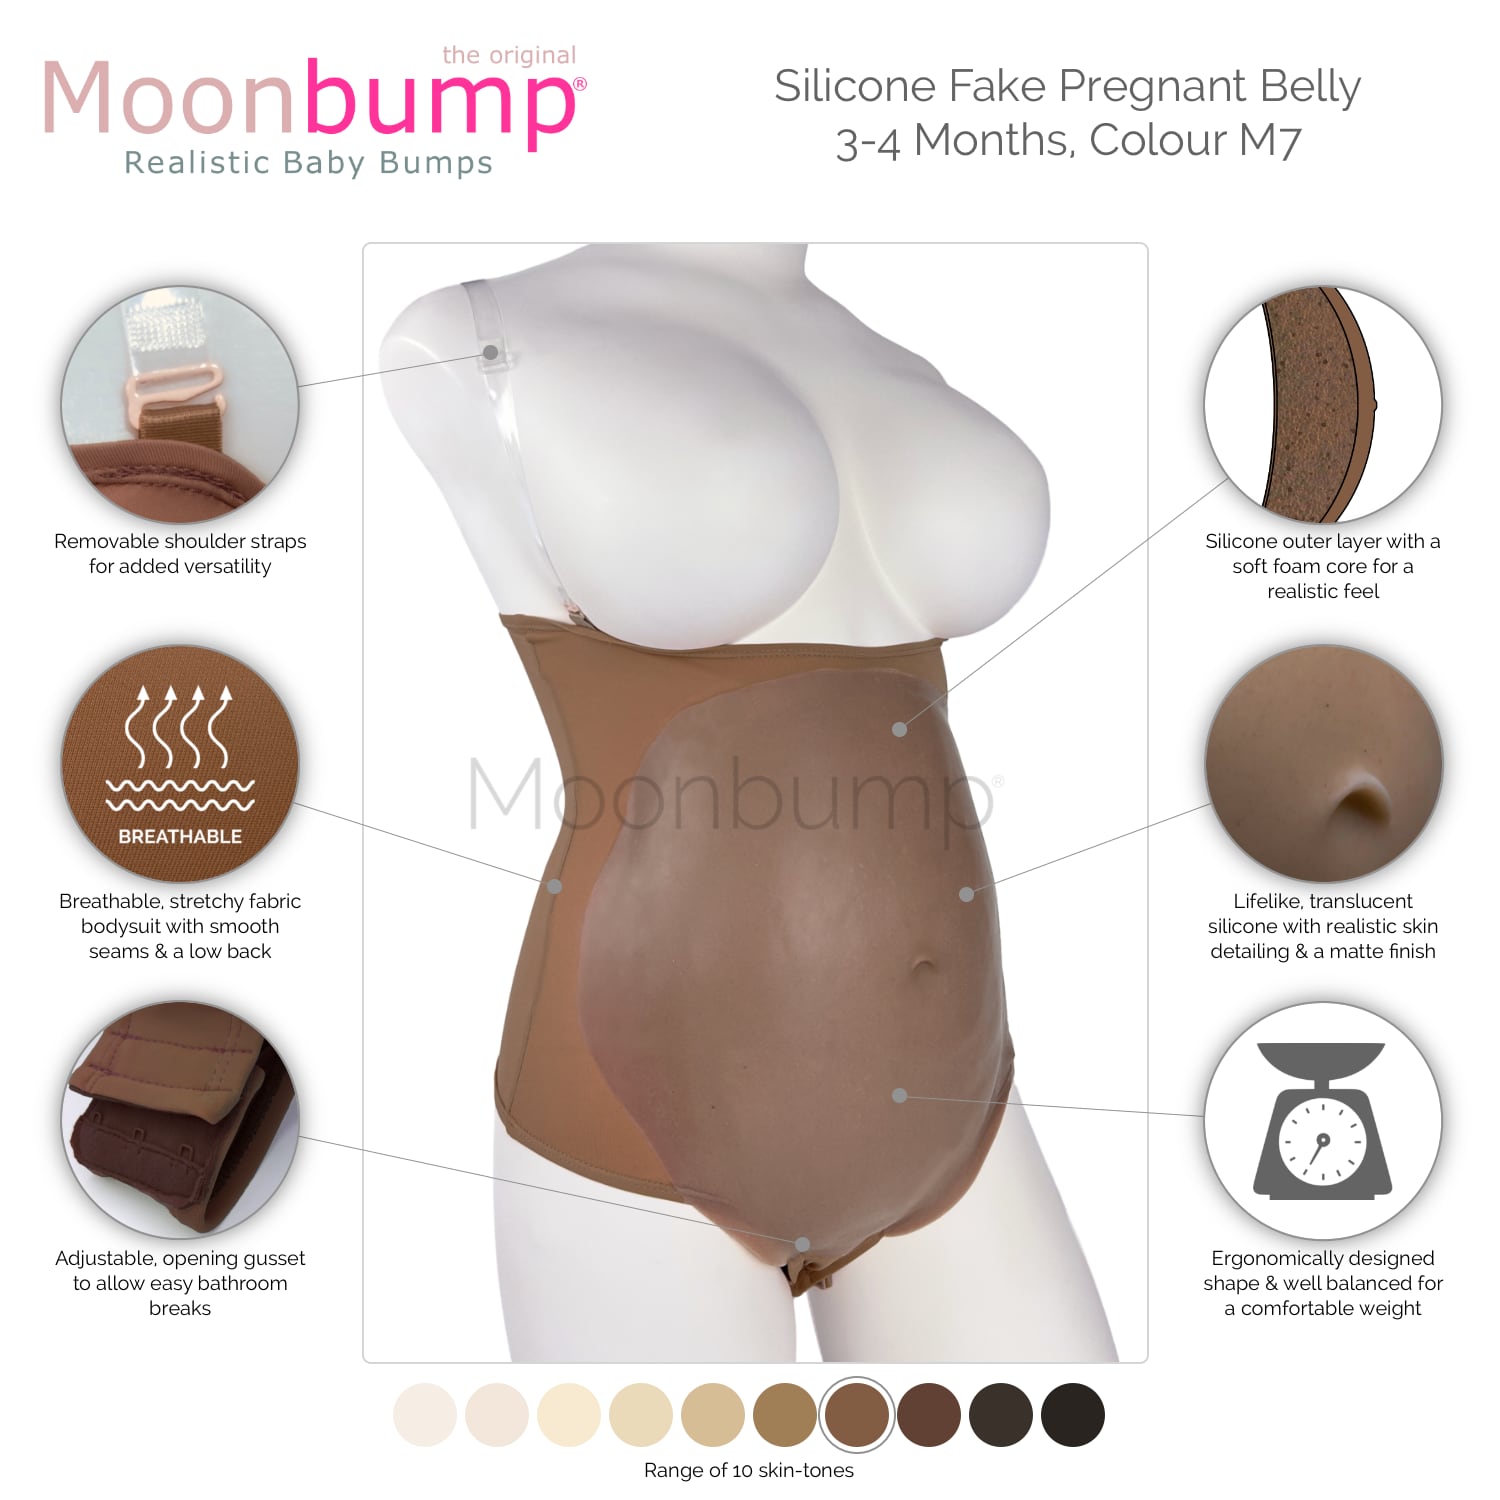 infographic showing the features of our silicone 3-4 month fake pregnancy stomach in a chocolate brown skin tone